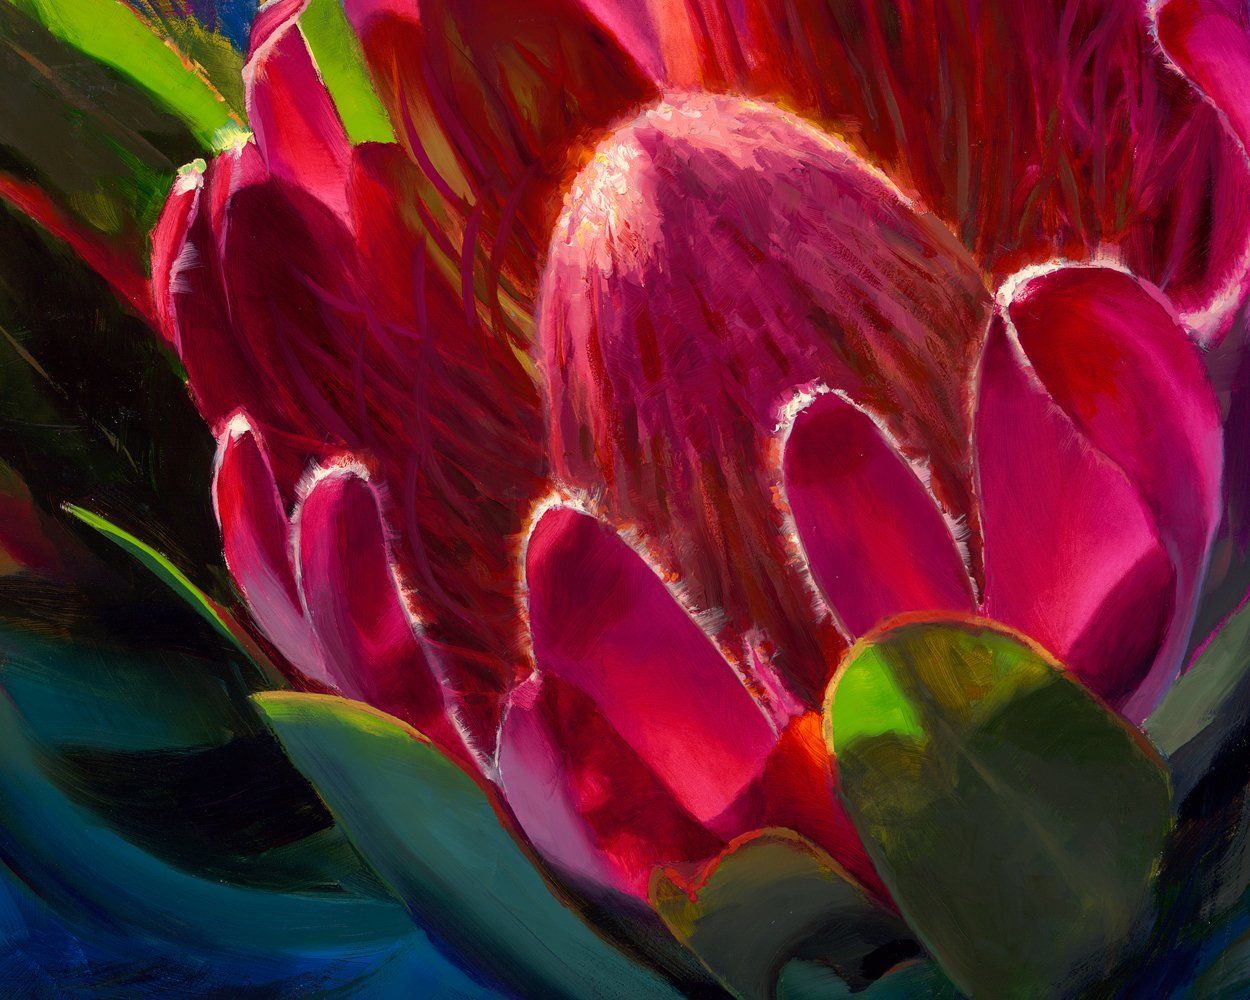 Protea Canvas Print of Hawaii Flower Painting - Sunlit Protea